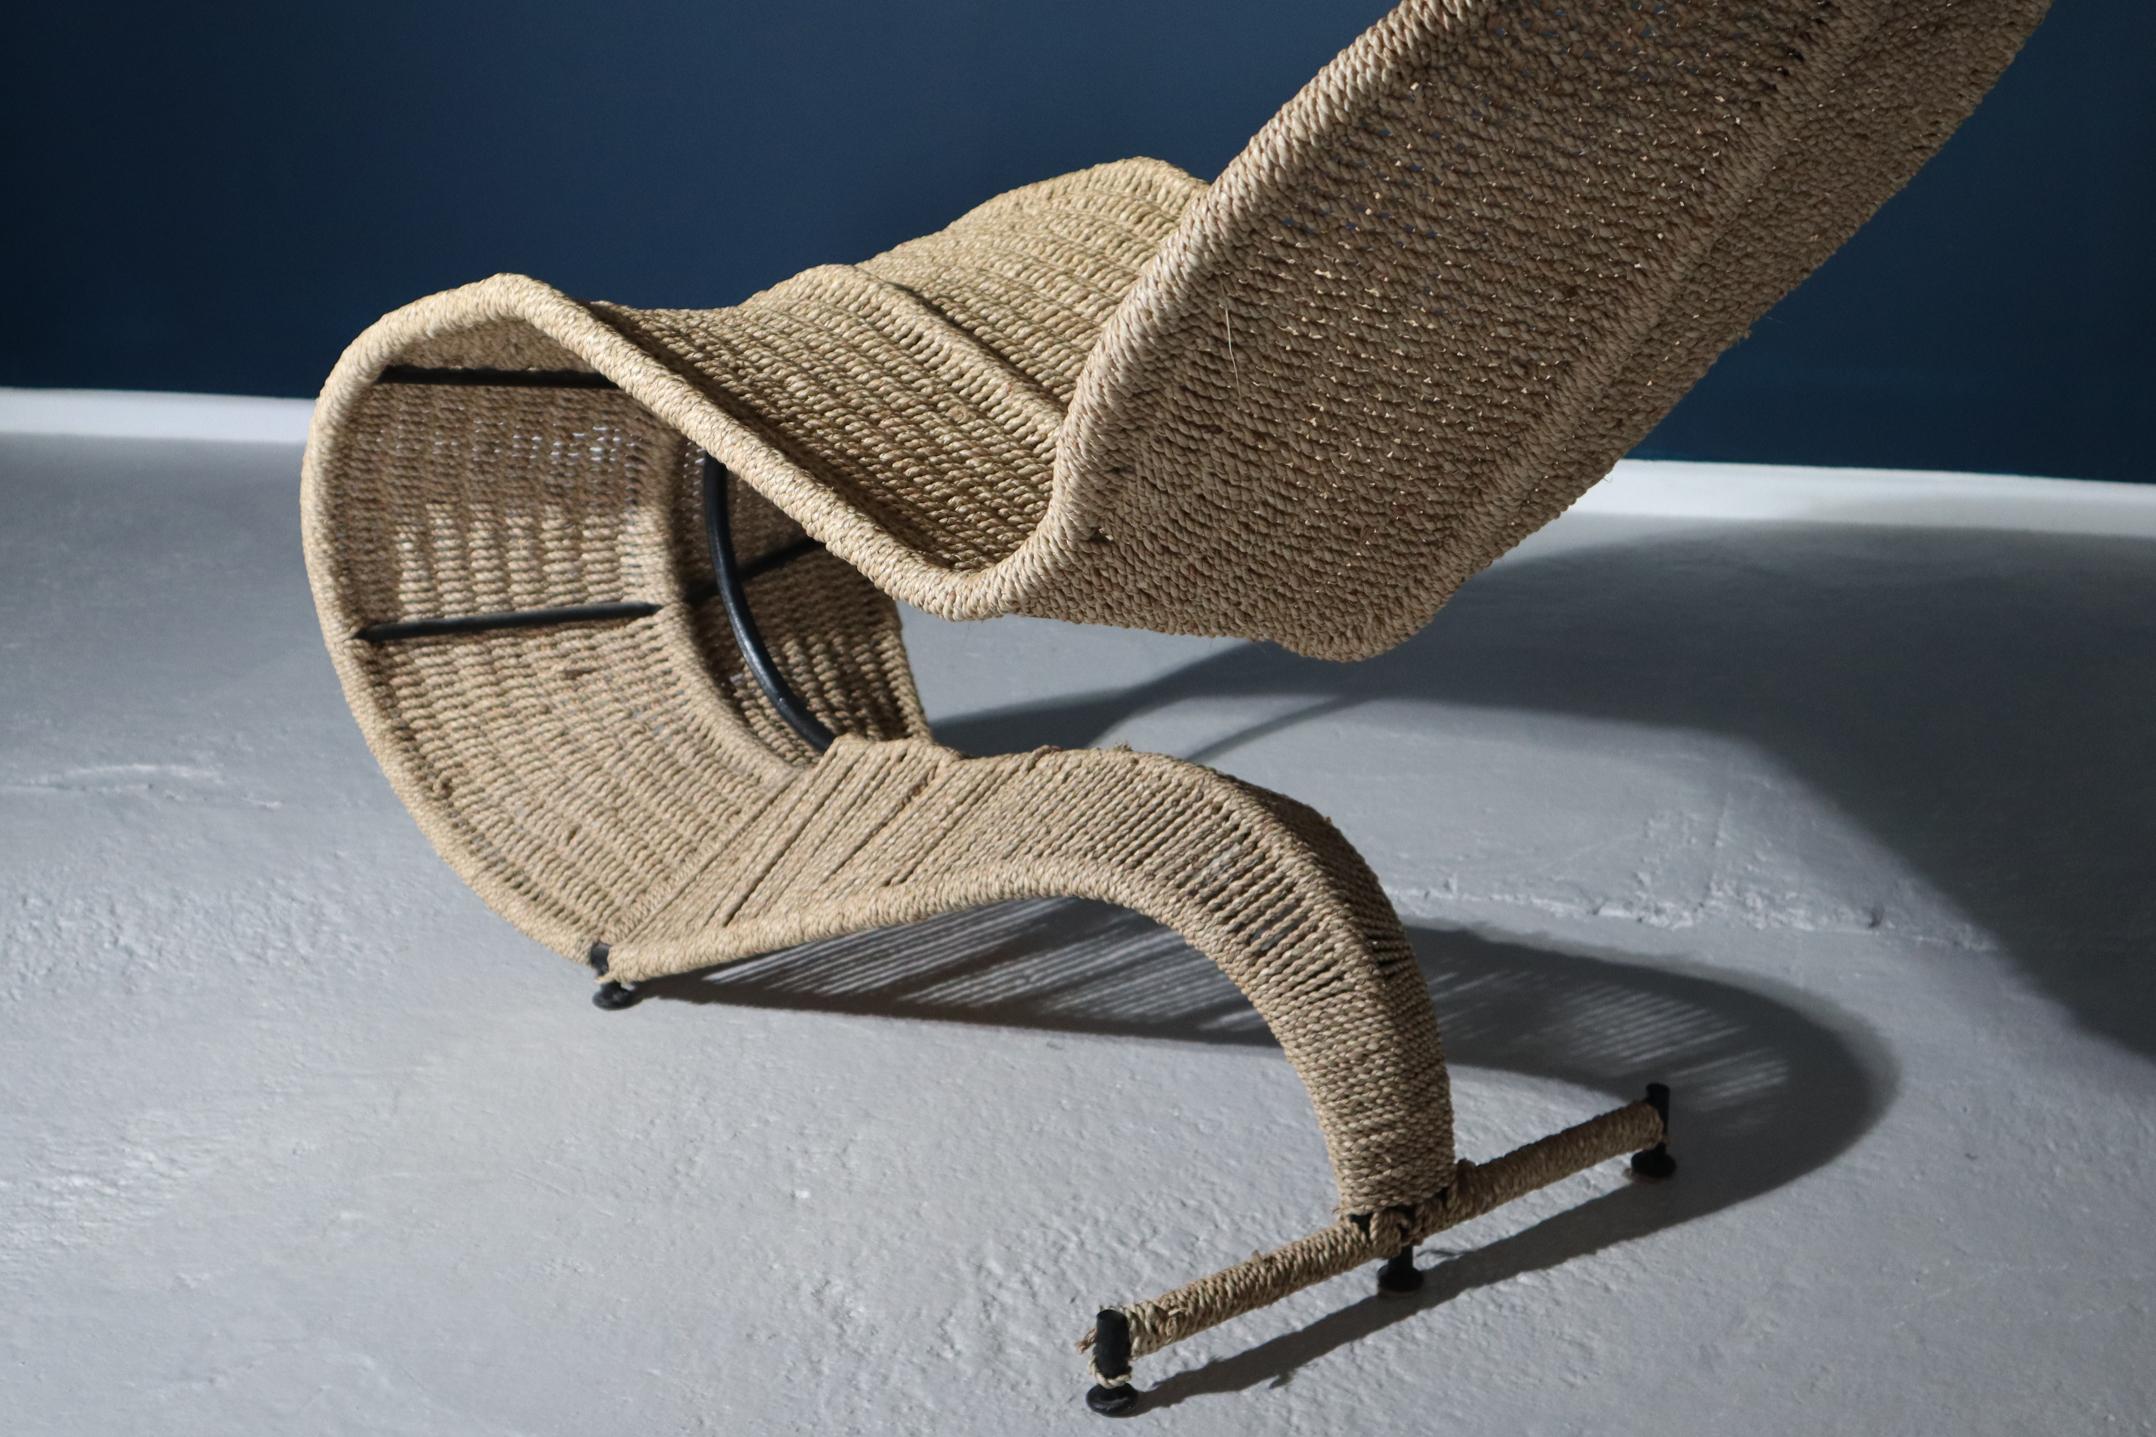 Sculpture Tom Dixon 'Bolide' Woven Seagrass Chair, London, 1991 In Good Condition For Sale In Ongar, GB